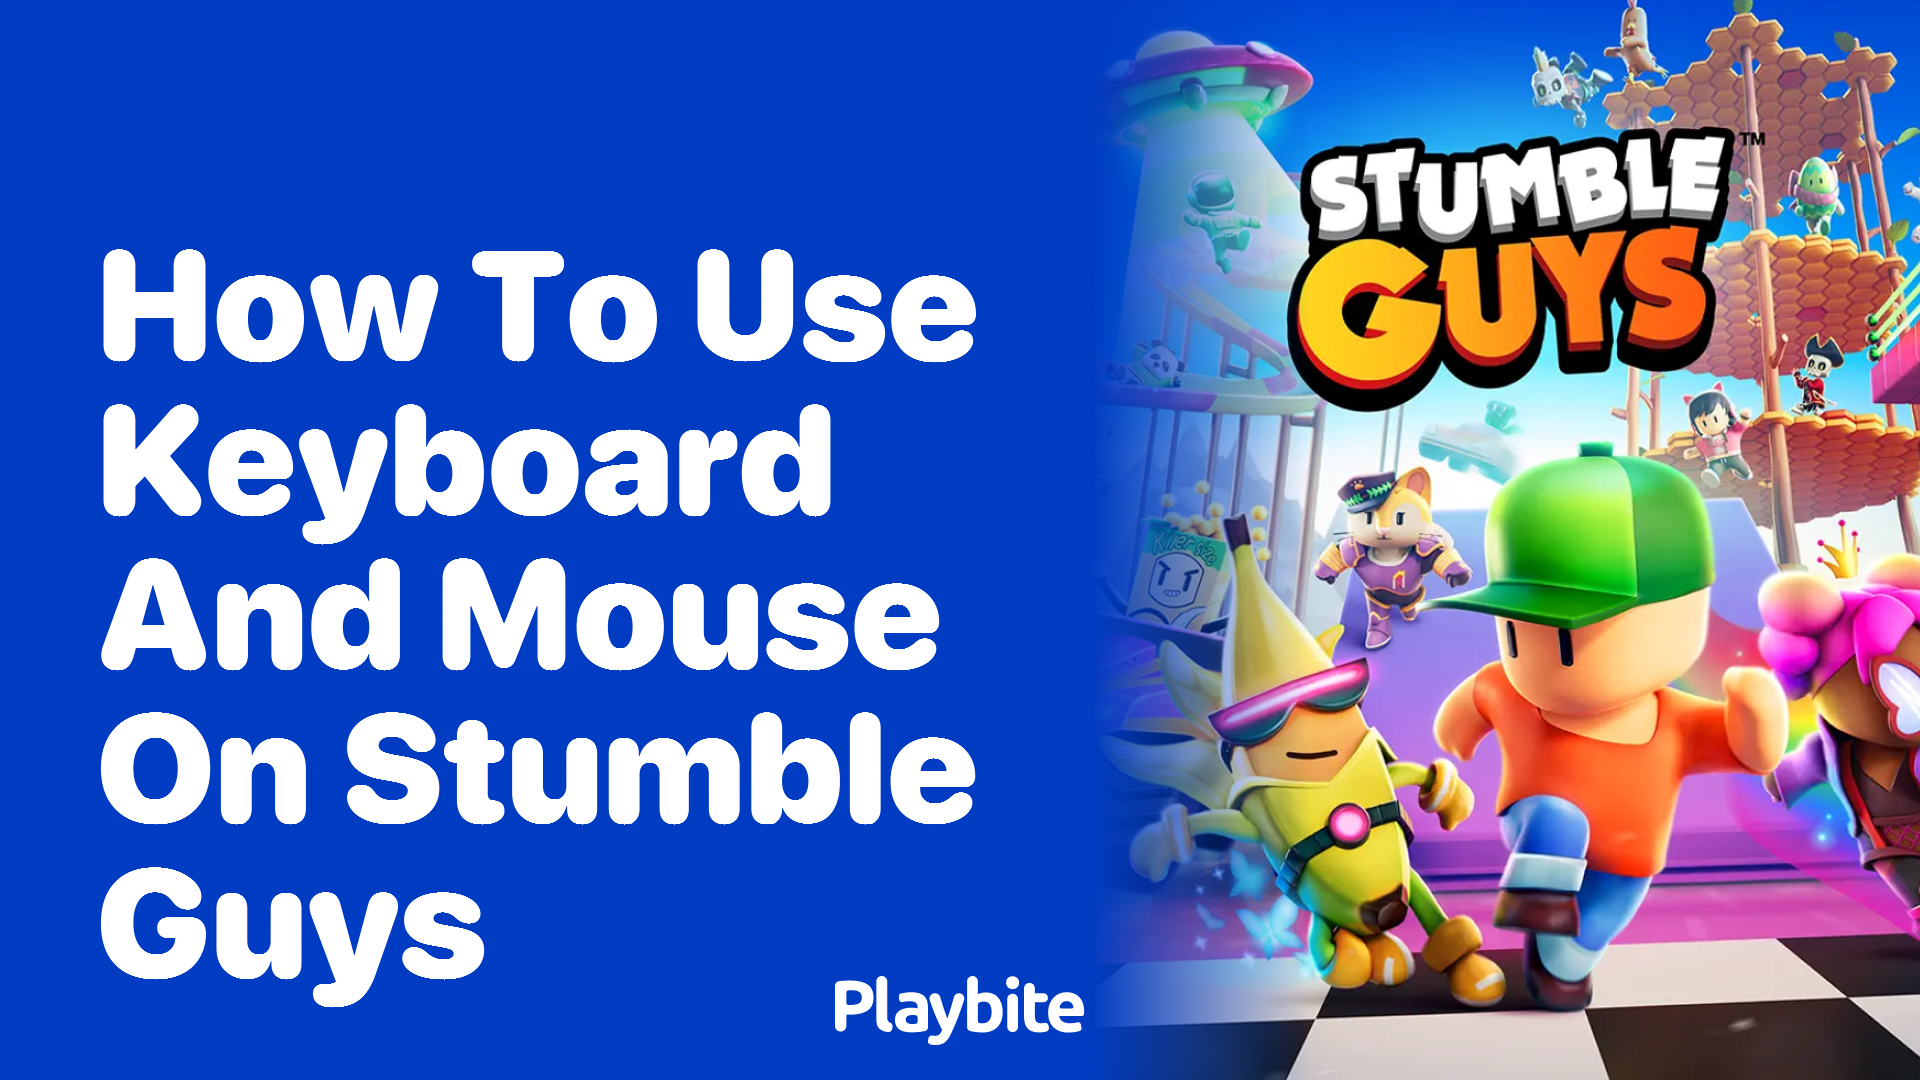 How to Use Keyboard and Mouse on Stumble Guys